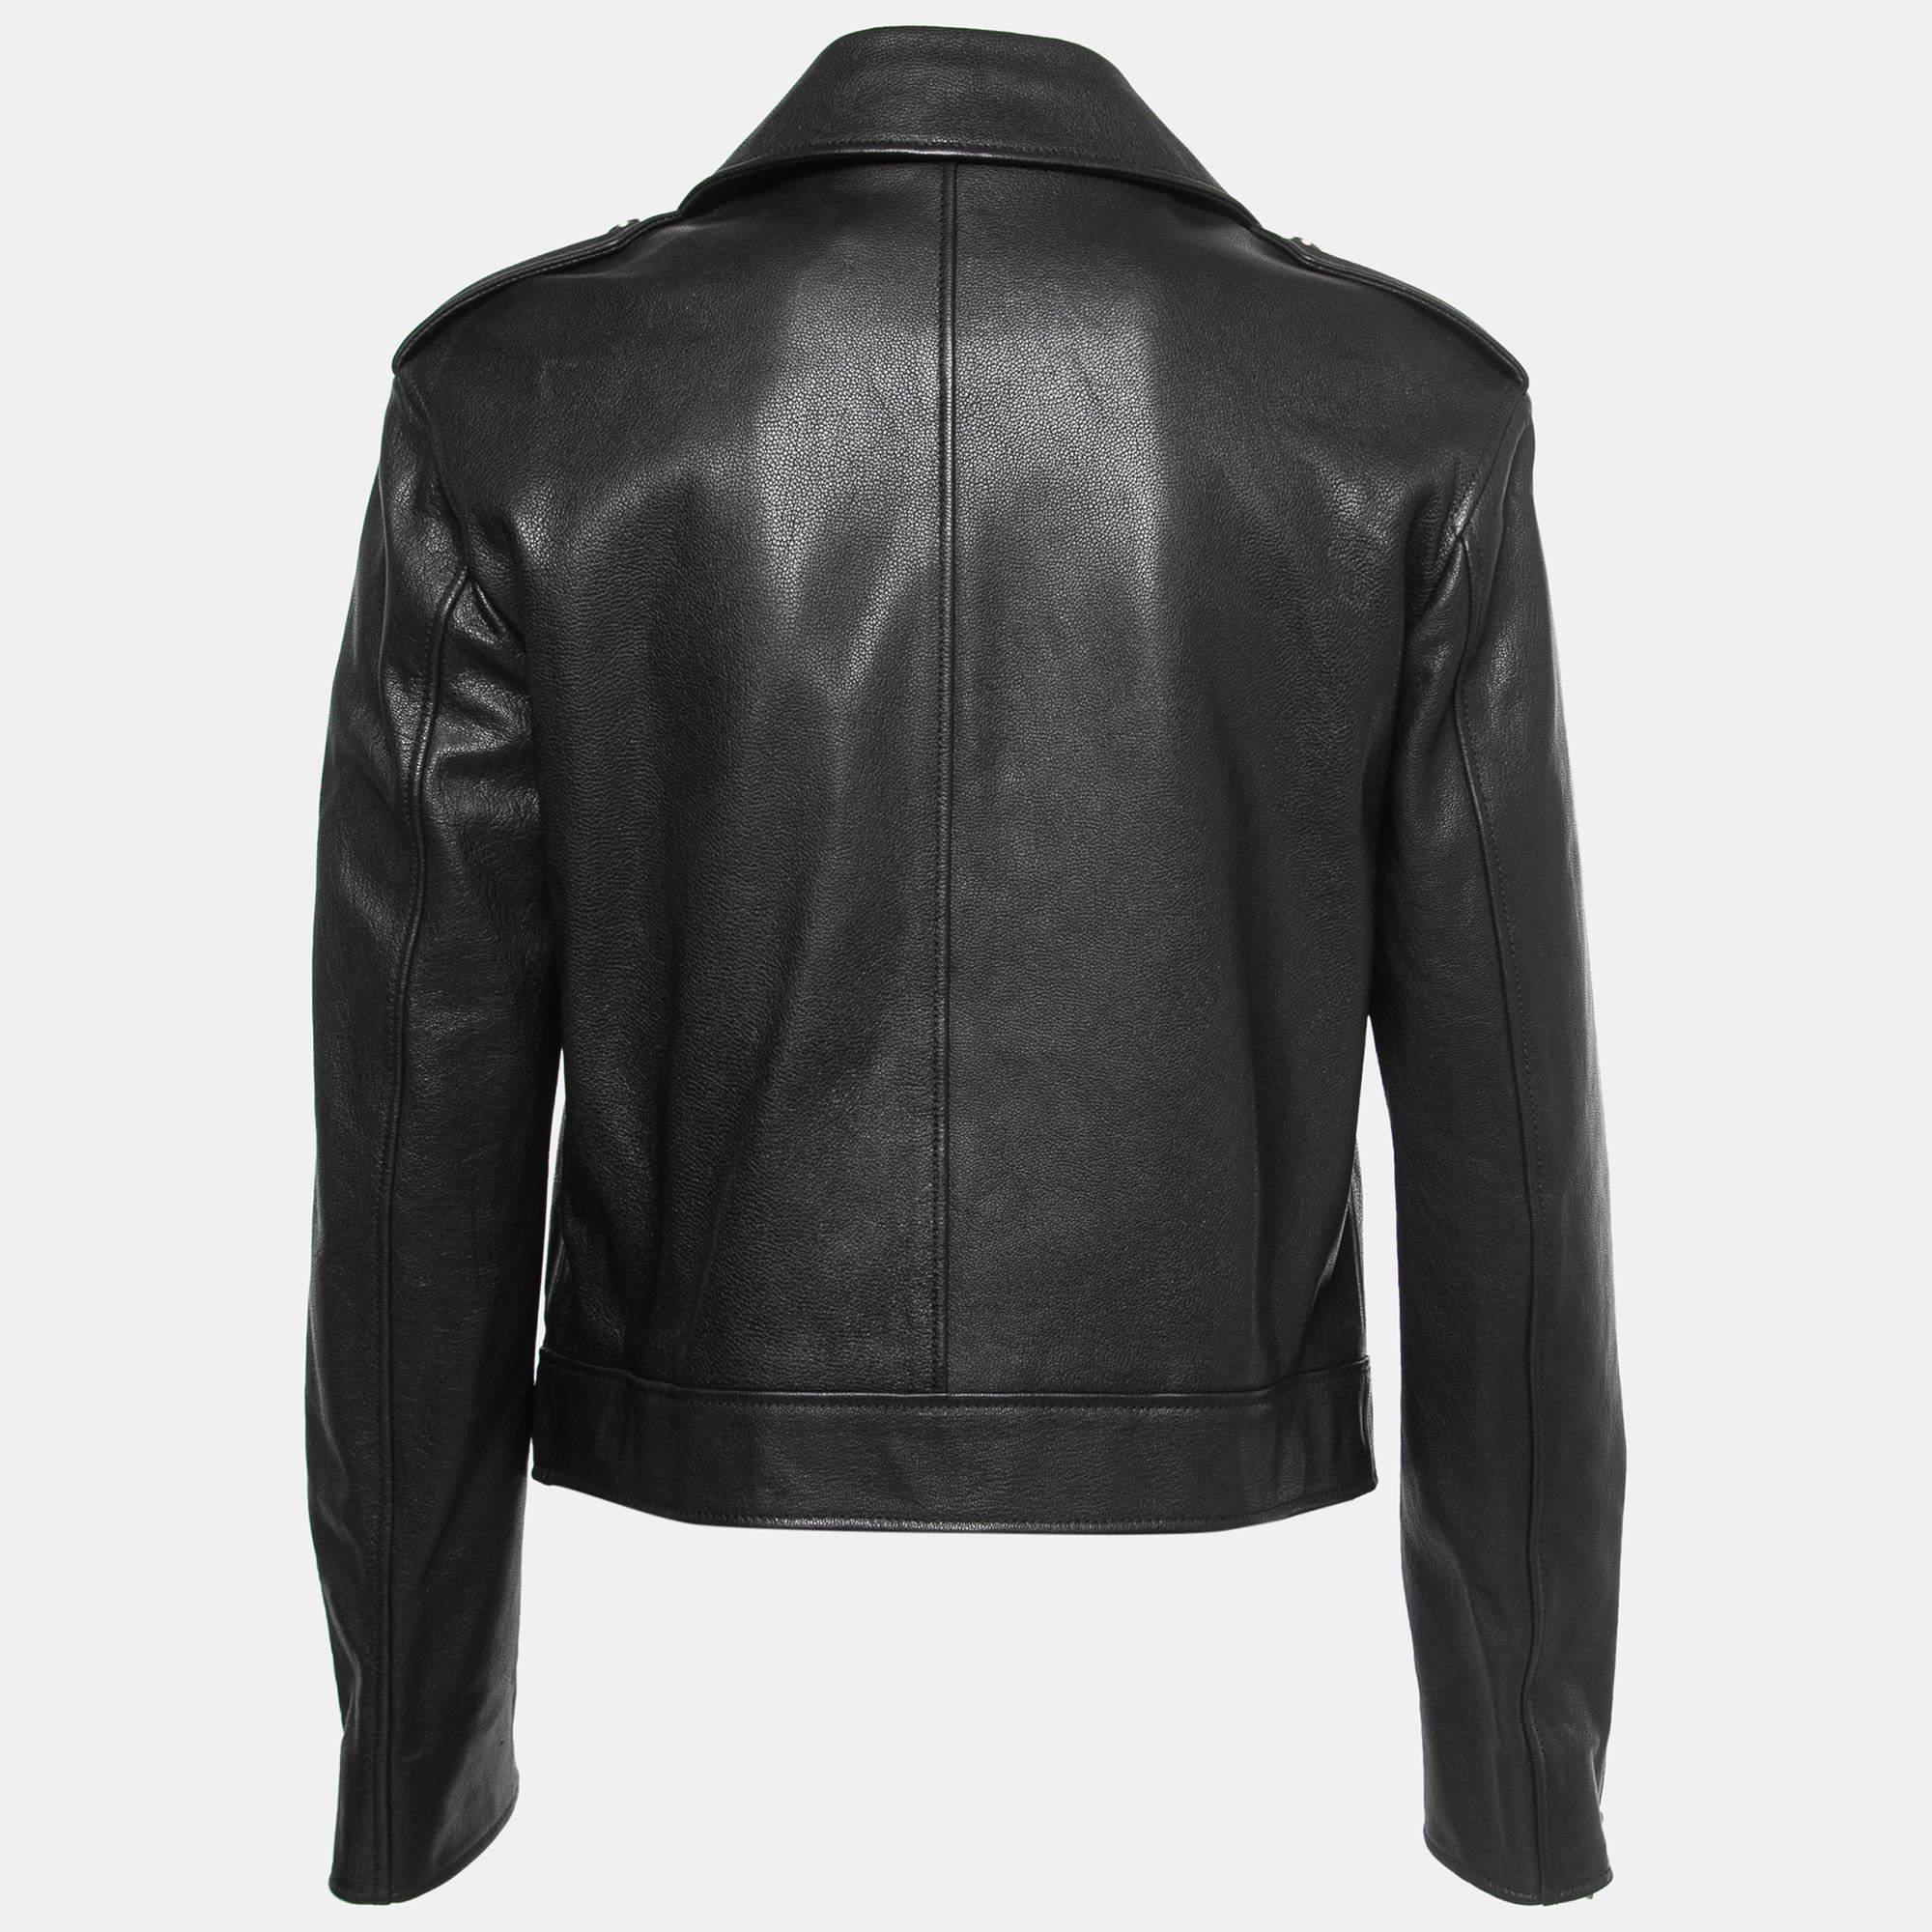 Crafted from high-quality black leather, it features a sleek and fitted silhouette with metal hardware accents and a zippered front. This iconic Christian Dior jacket combines fashion-forward design with a rebellious spirit, making it a must-have